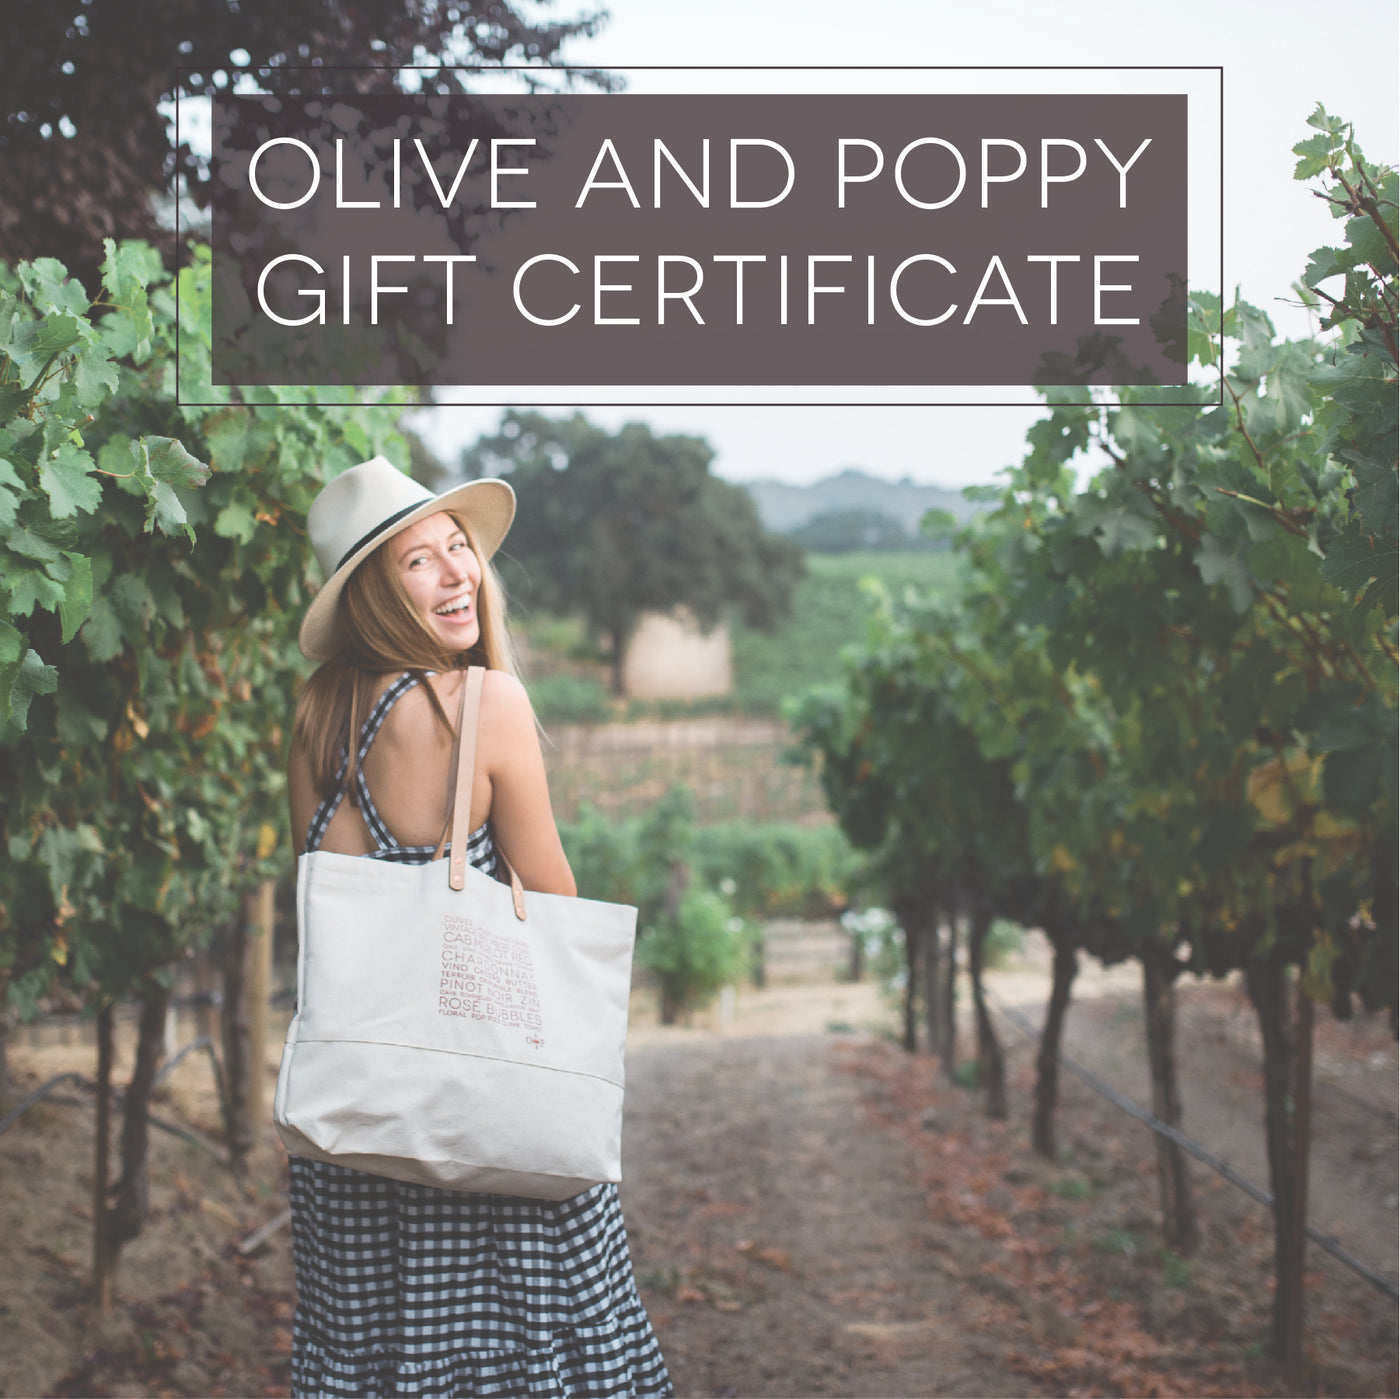 Olive and Poppy Gift Certificate - Olive and Poppy